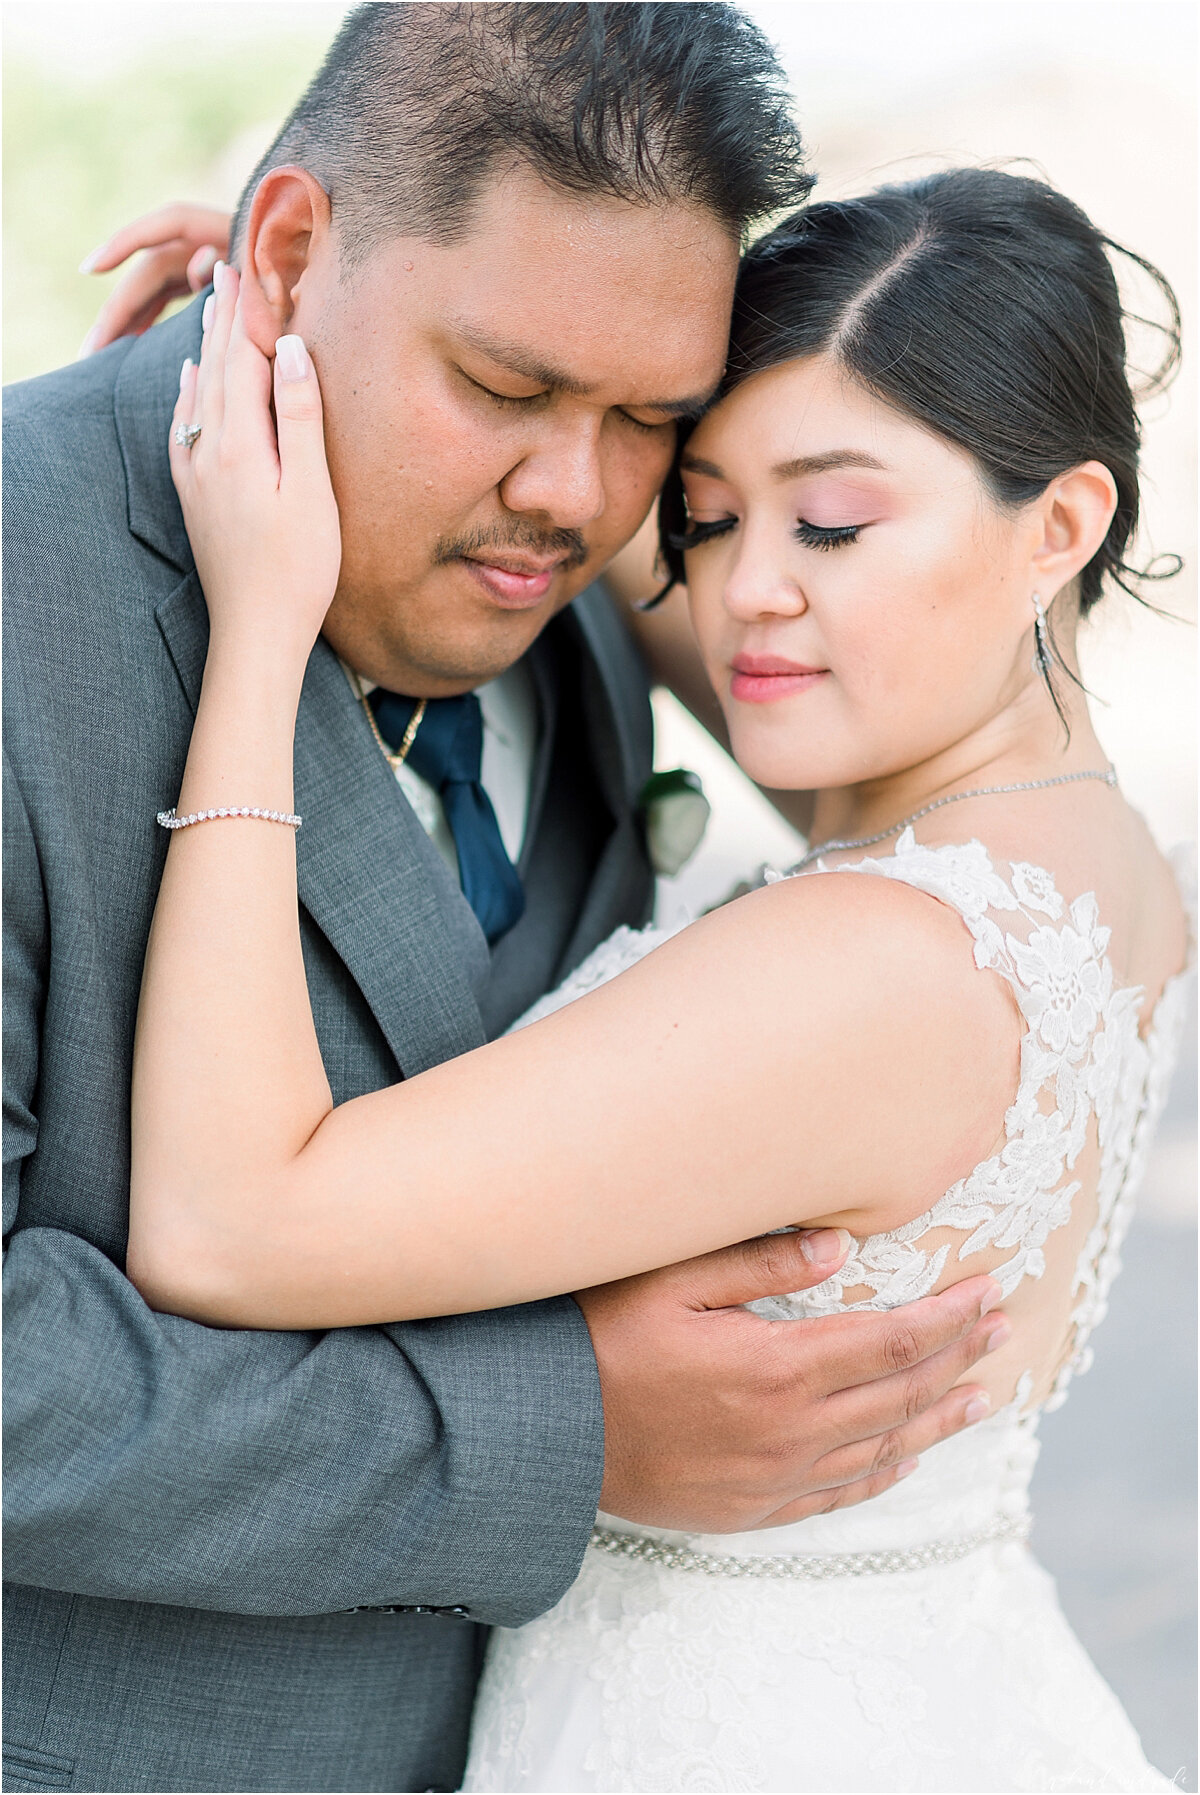 Light and Airy Wedding Photographer Chicago, Furama Chinese Wedding Photographer + Chicago Latino Photography + Naperville Wedding Photographer + Chicago Engagement Photographer + Best Photographer In Chicago_0049.jpg